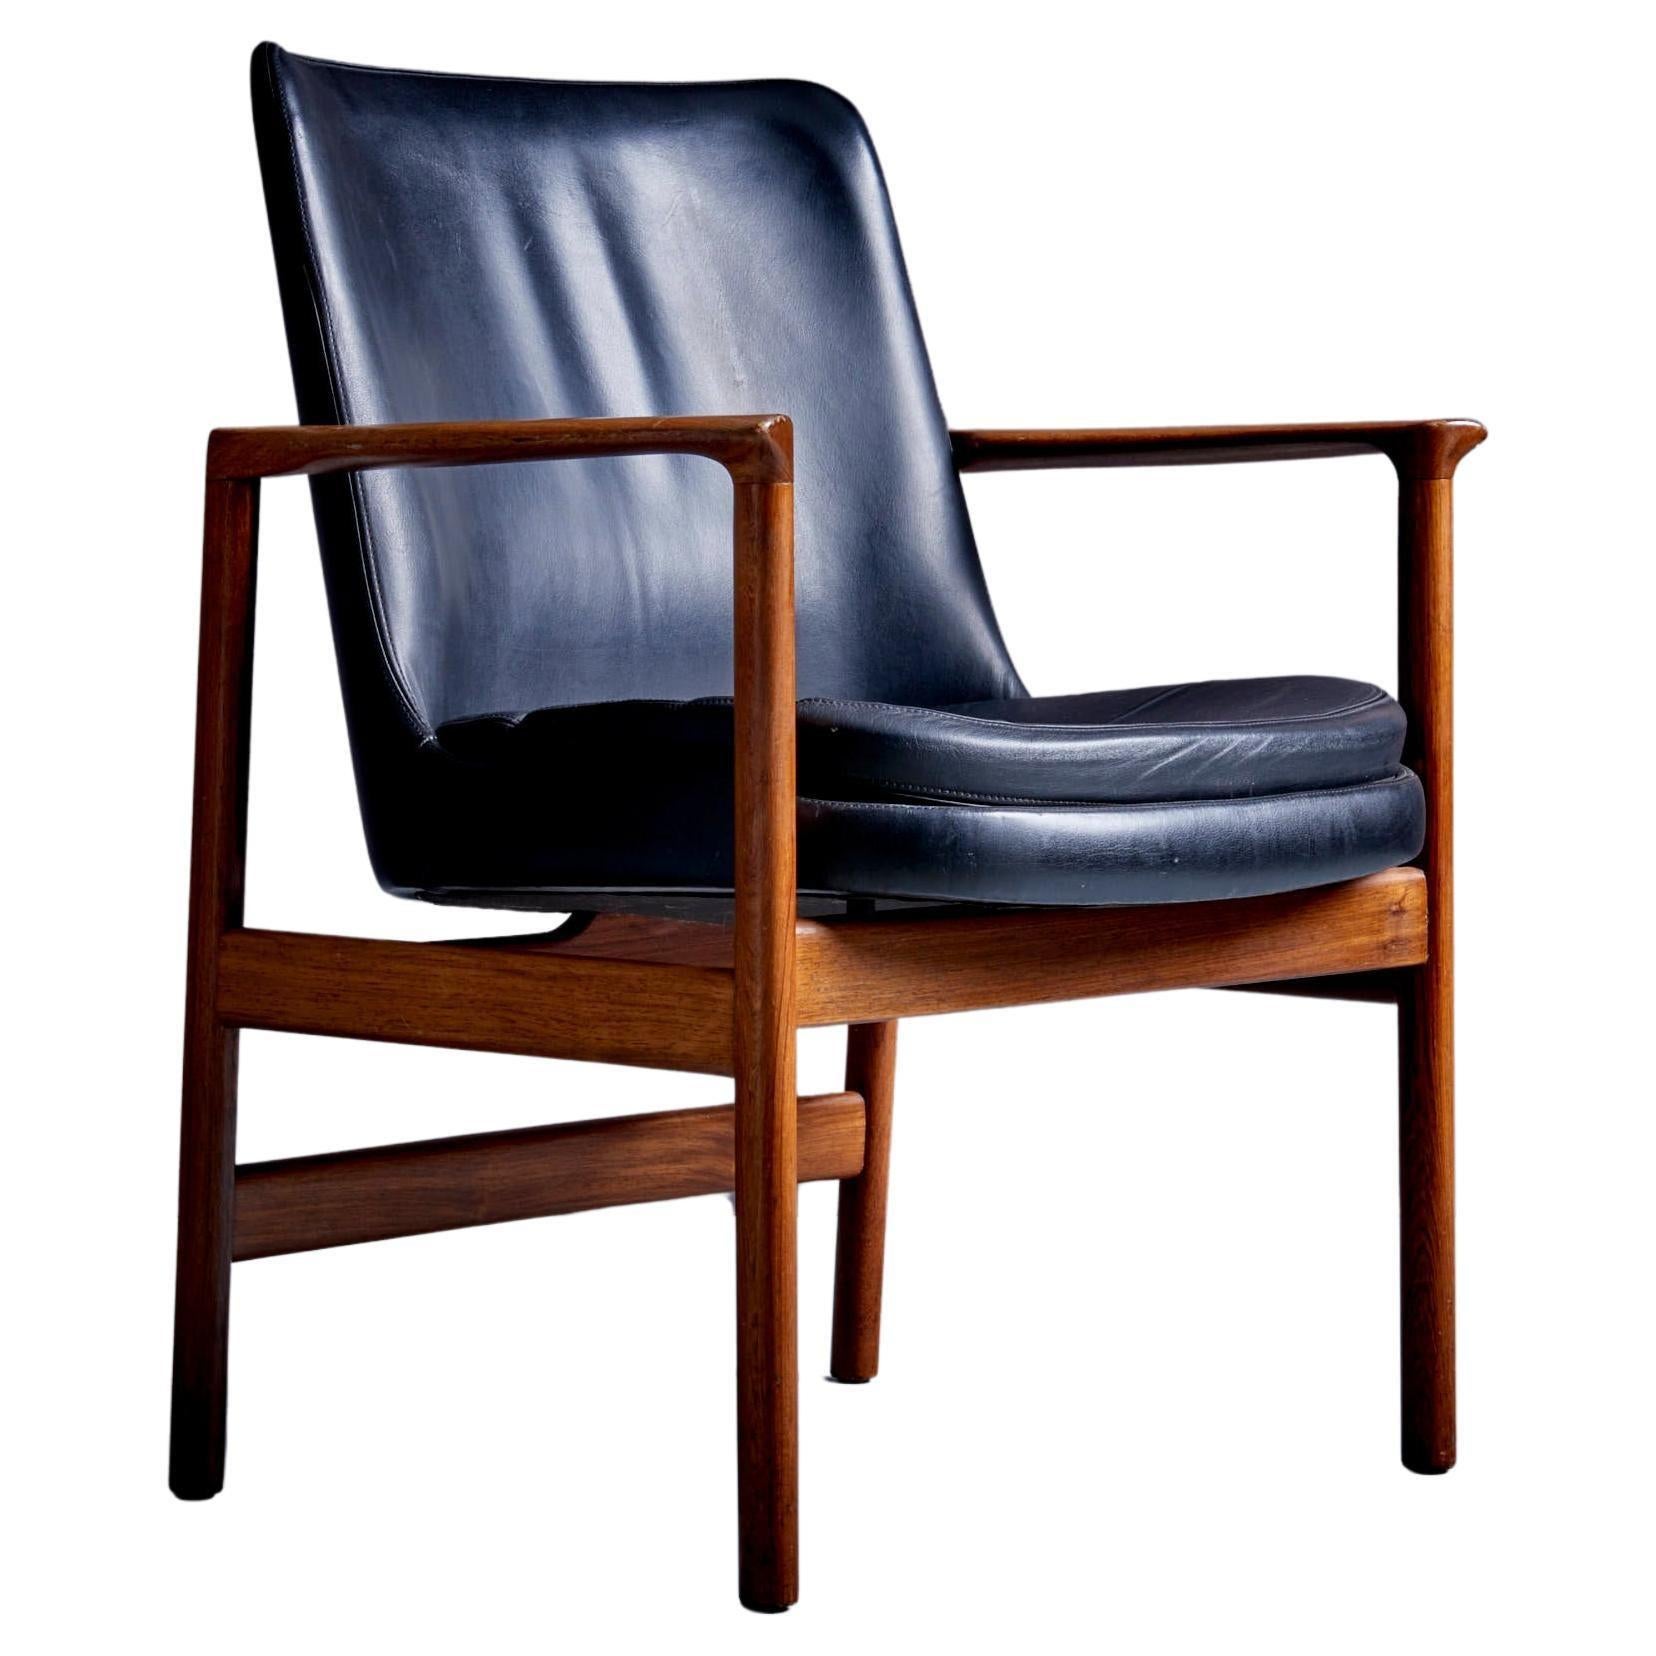 Ib Kofod-Larsen Arm or Easy Chair for Fröscher Sitform, Germany 1960s For Sale